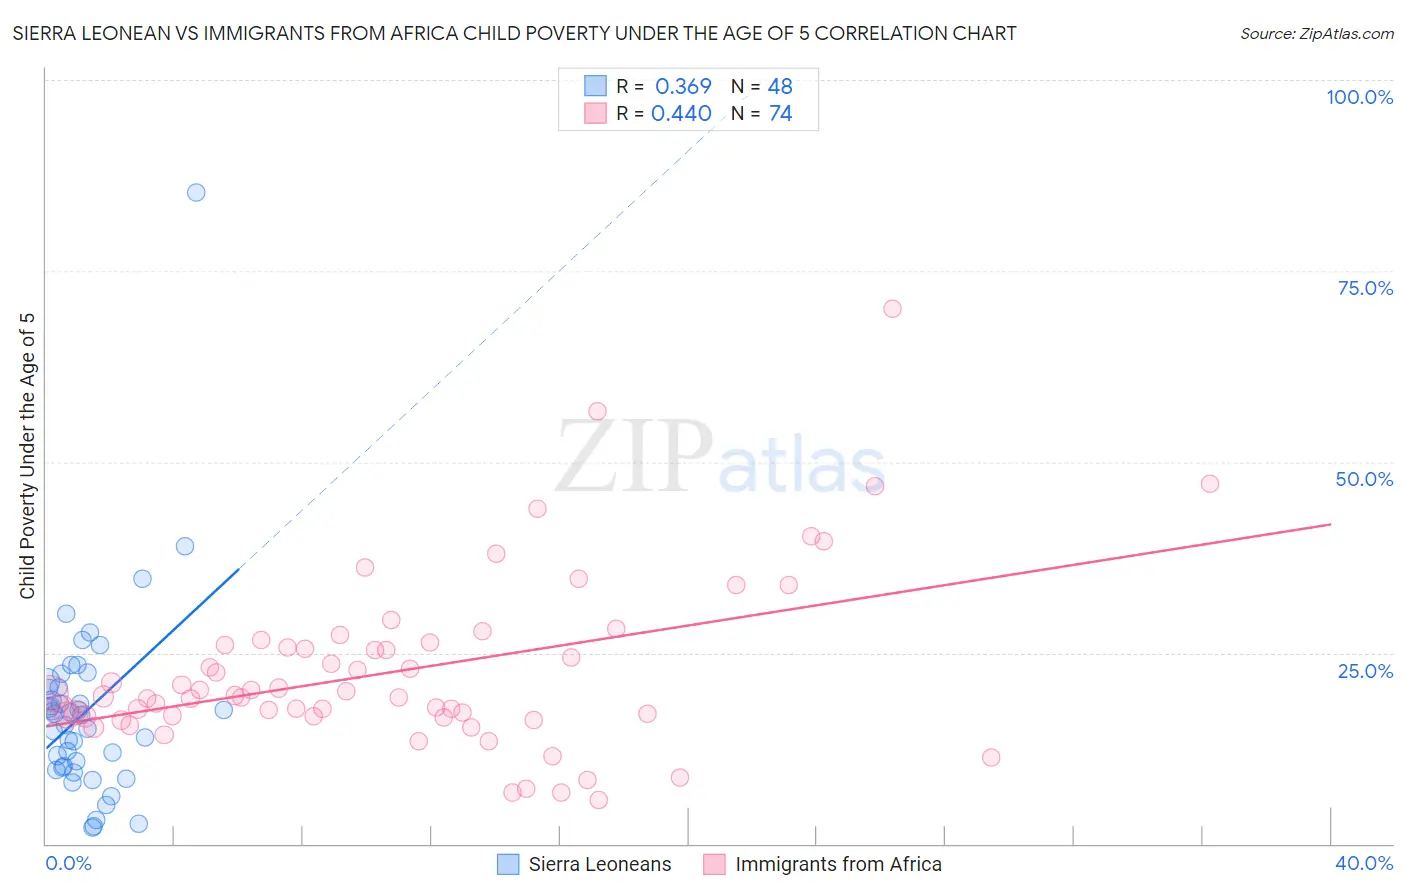 Sierra Leonean vs Immigrants from Africa Child Poverty Under the Age of 5